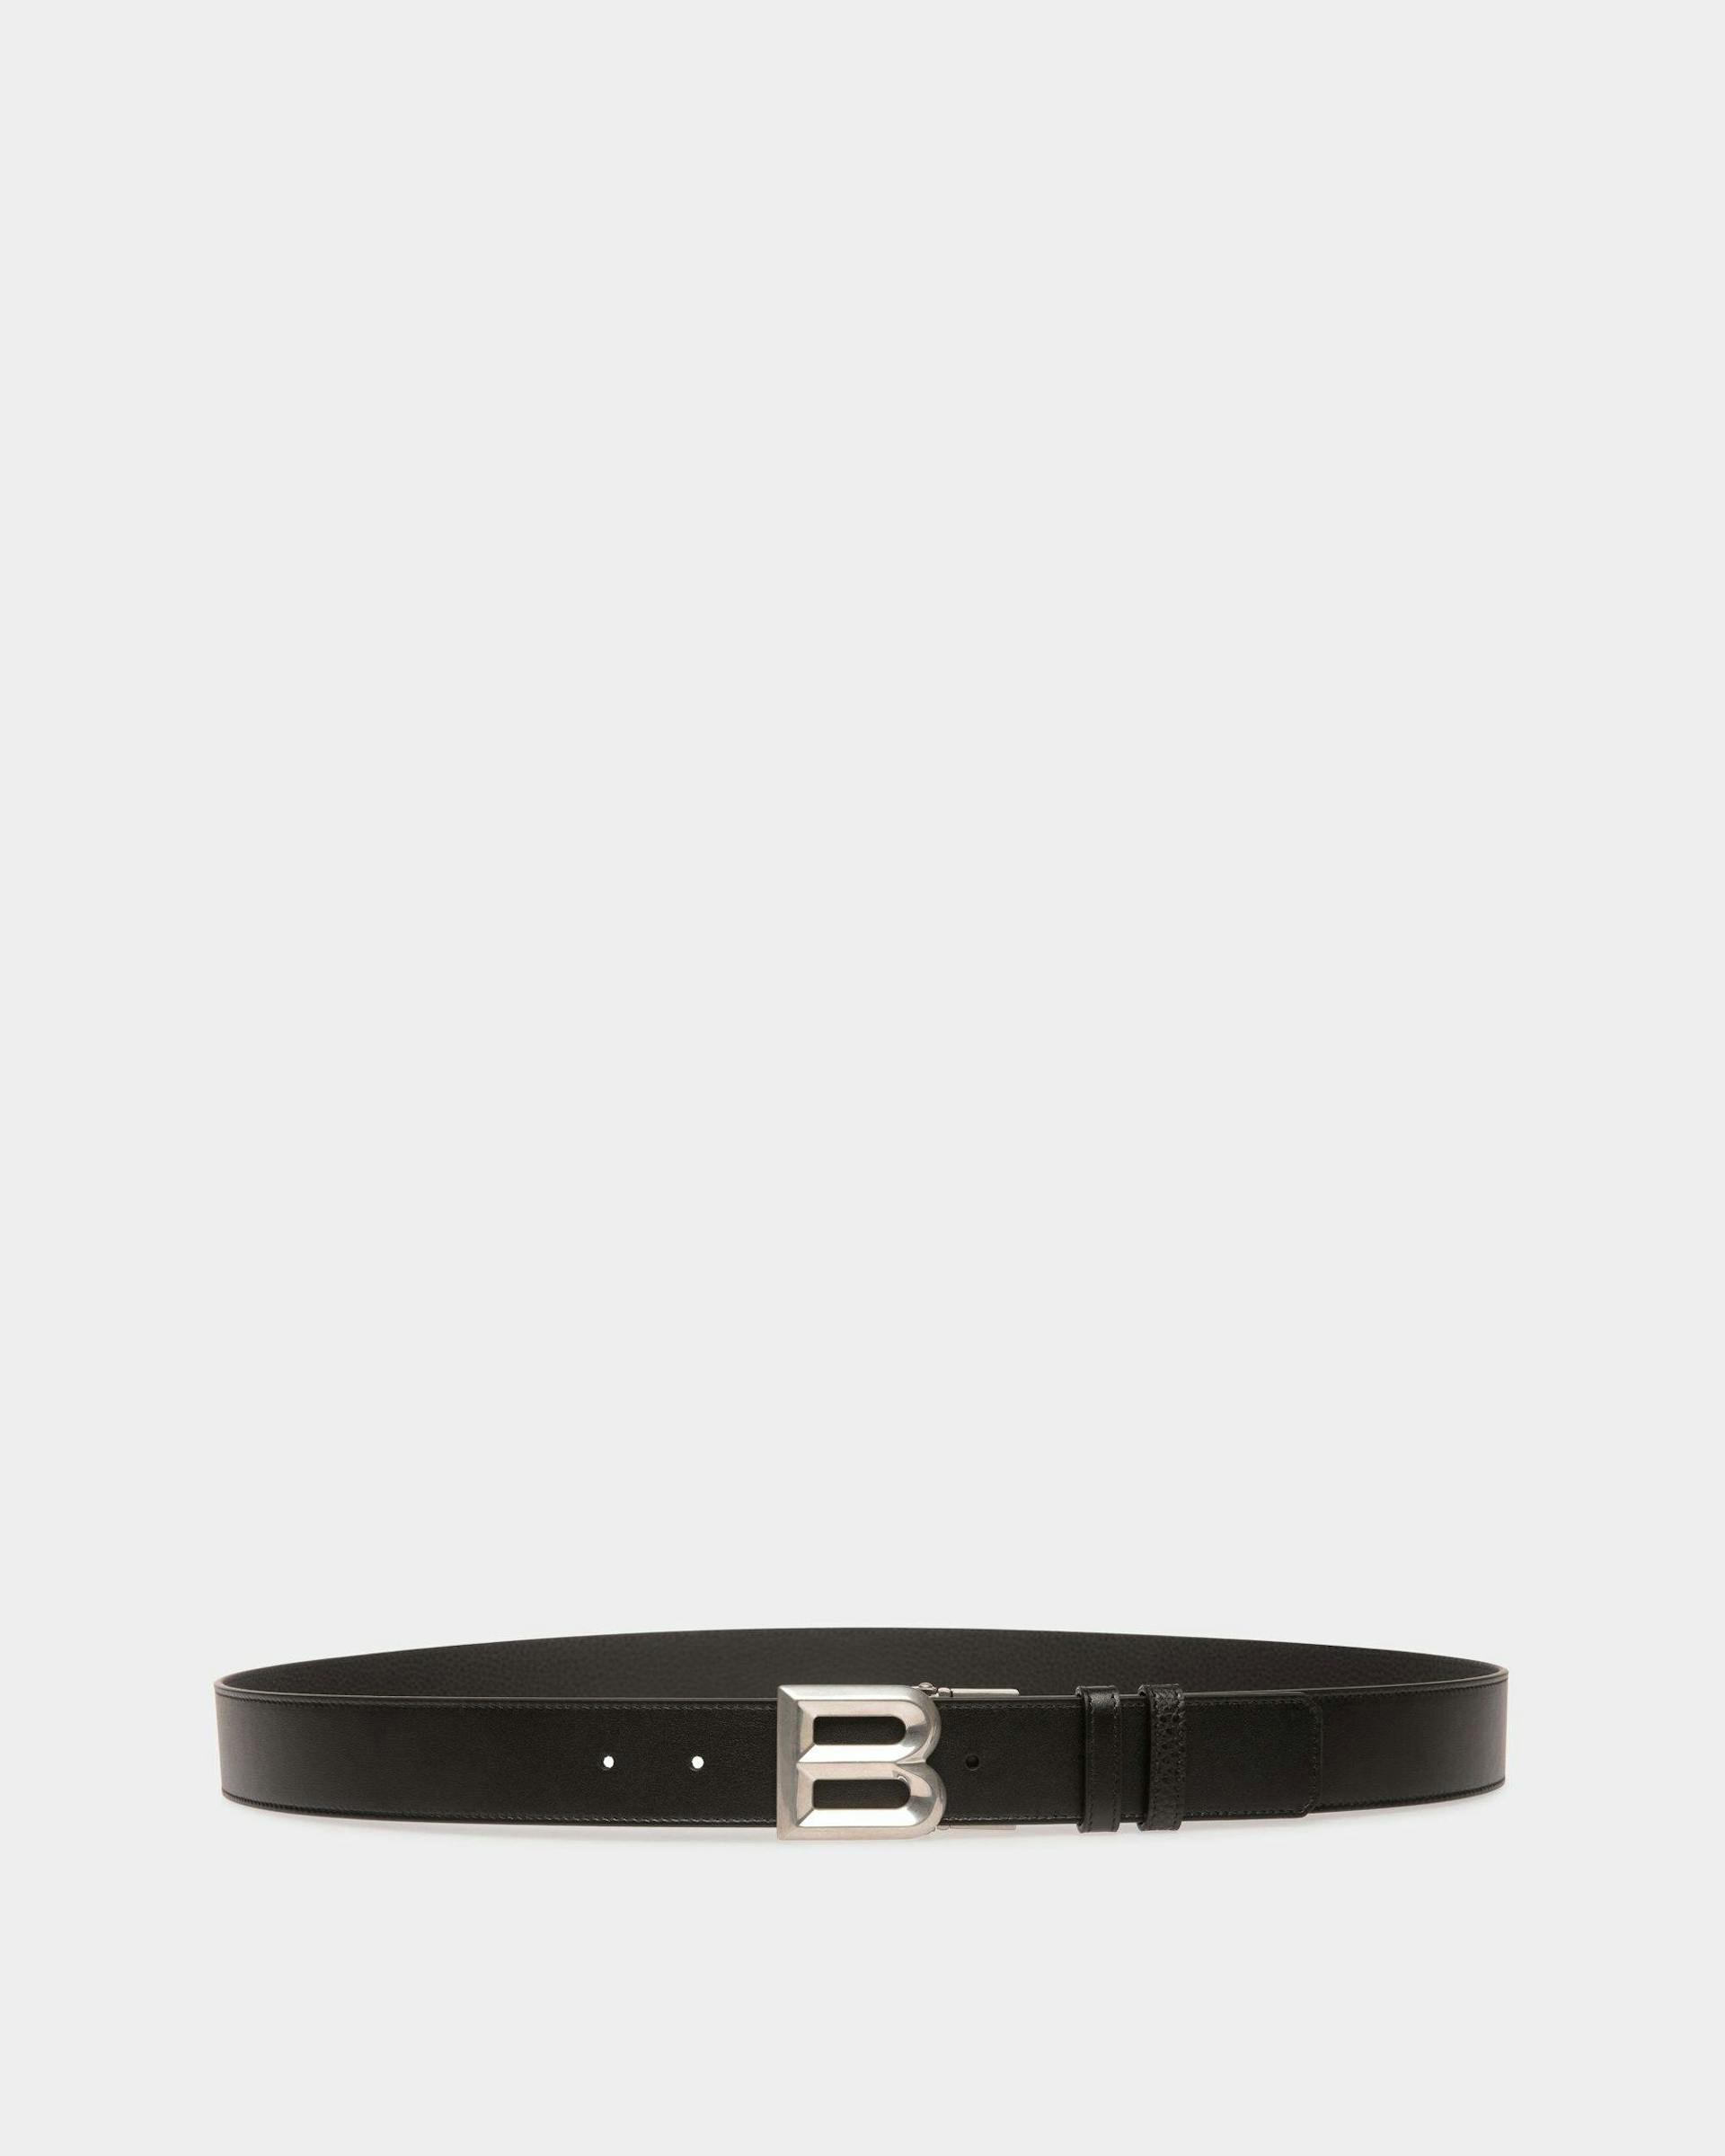 B Bold 35mm | Men's Reversible And Adjustable Belt in Black Leather | Bally